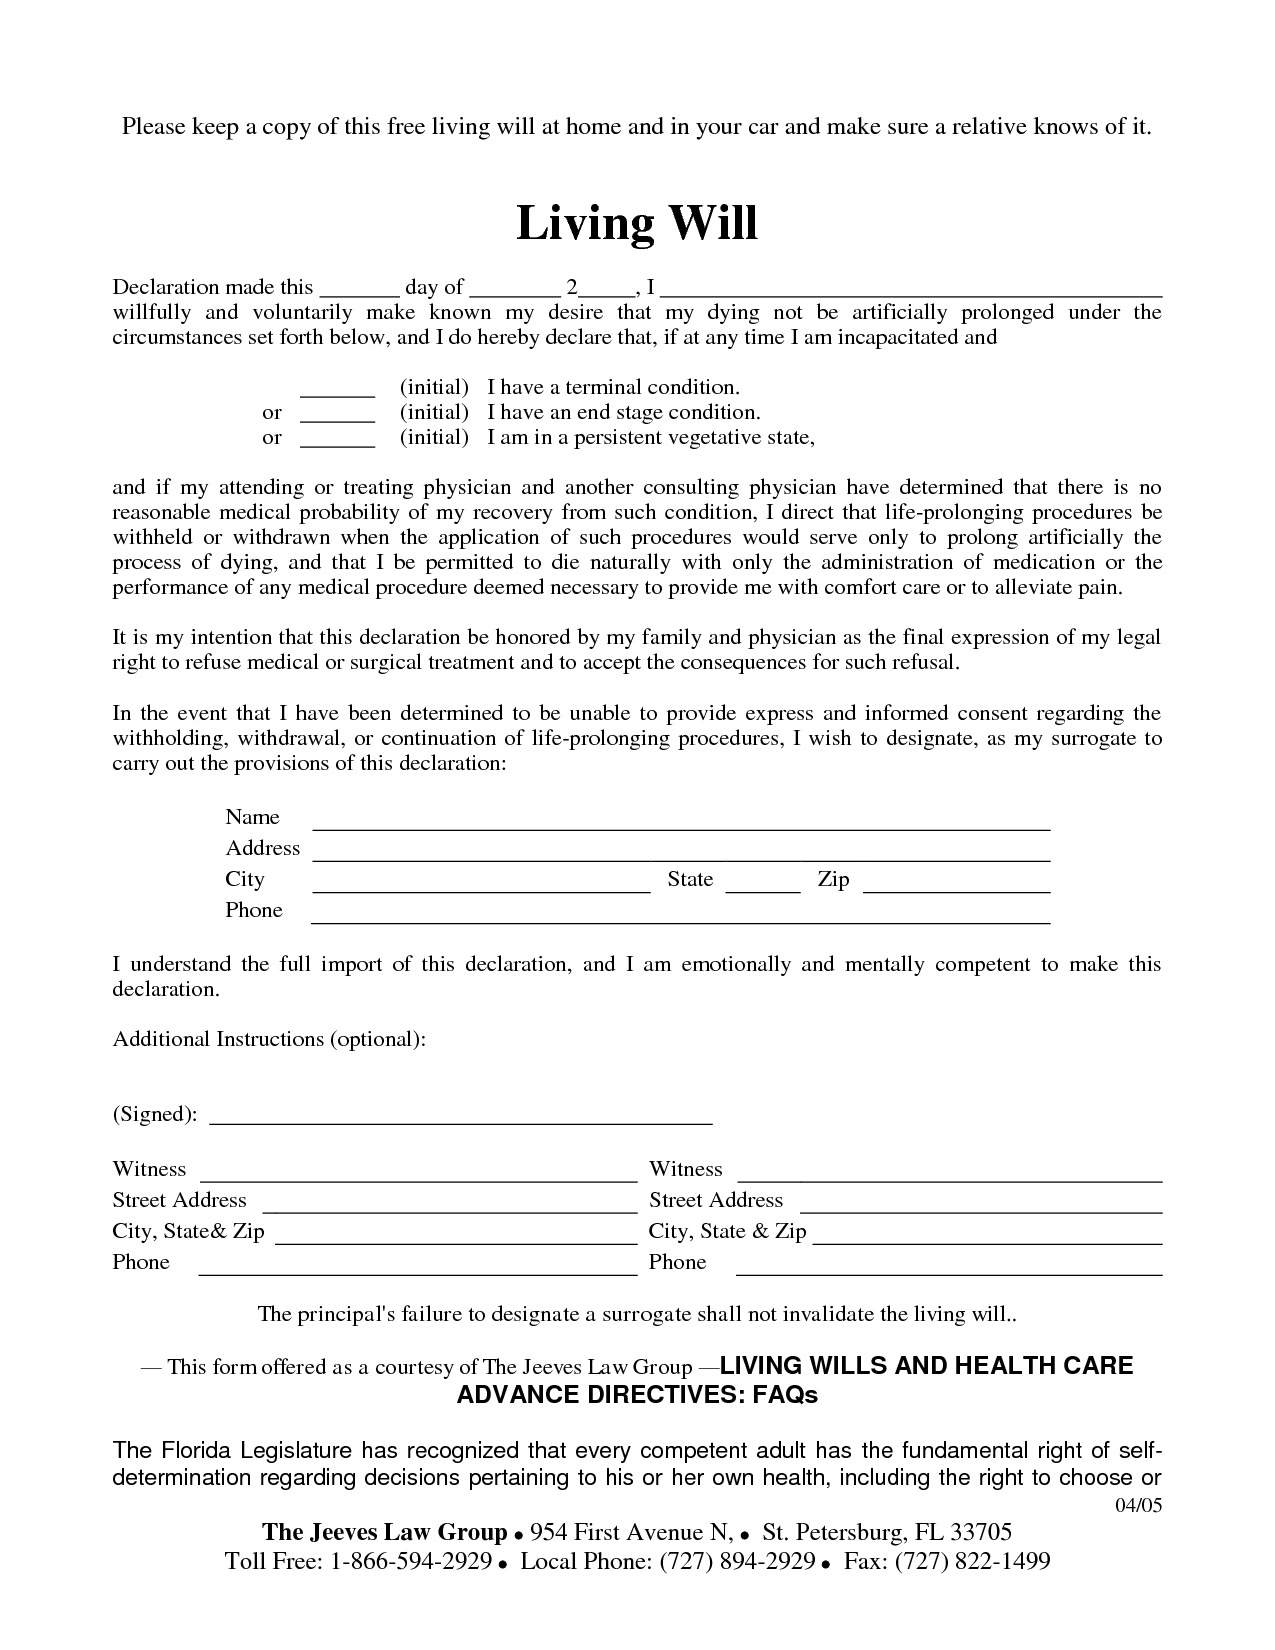 Free Copy Of Living Willrichard_Cataman - Living Will Sample - Free Printable Living Will